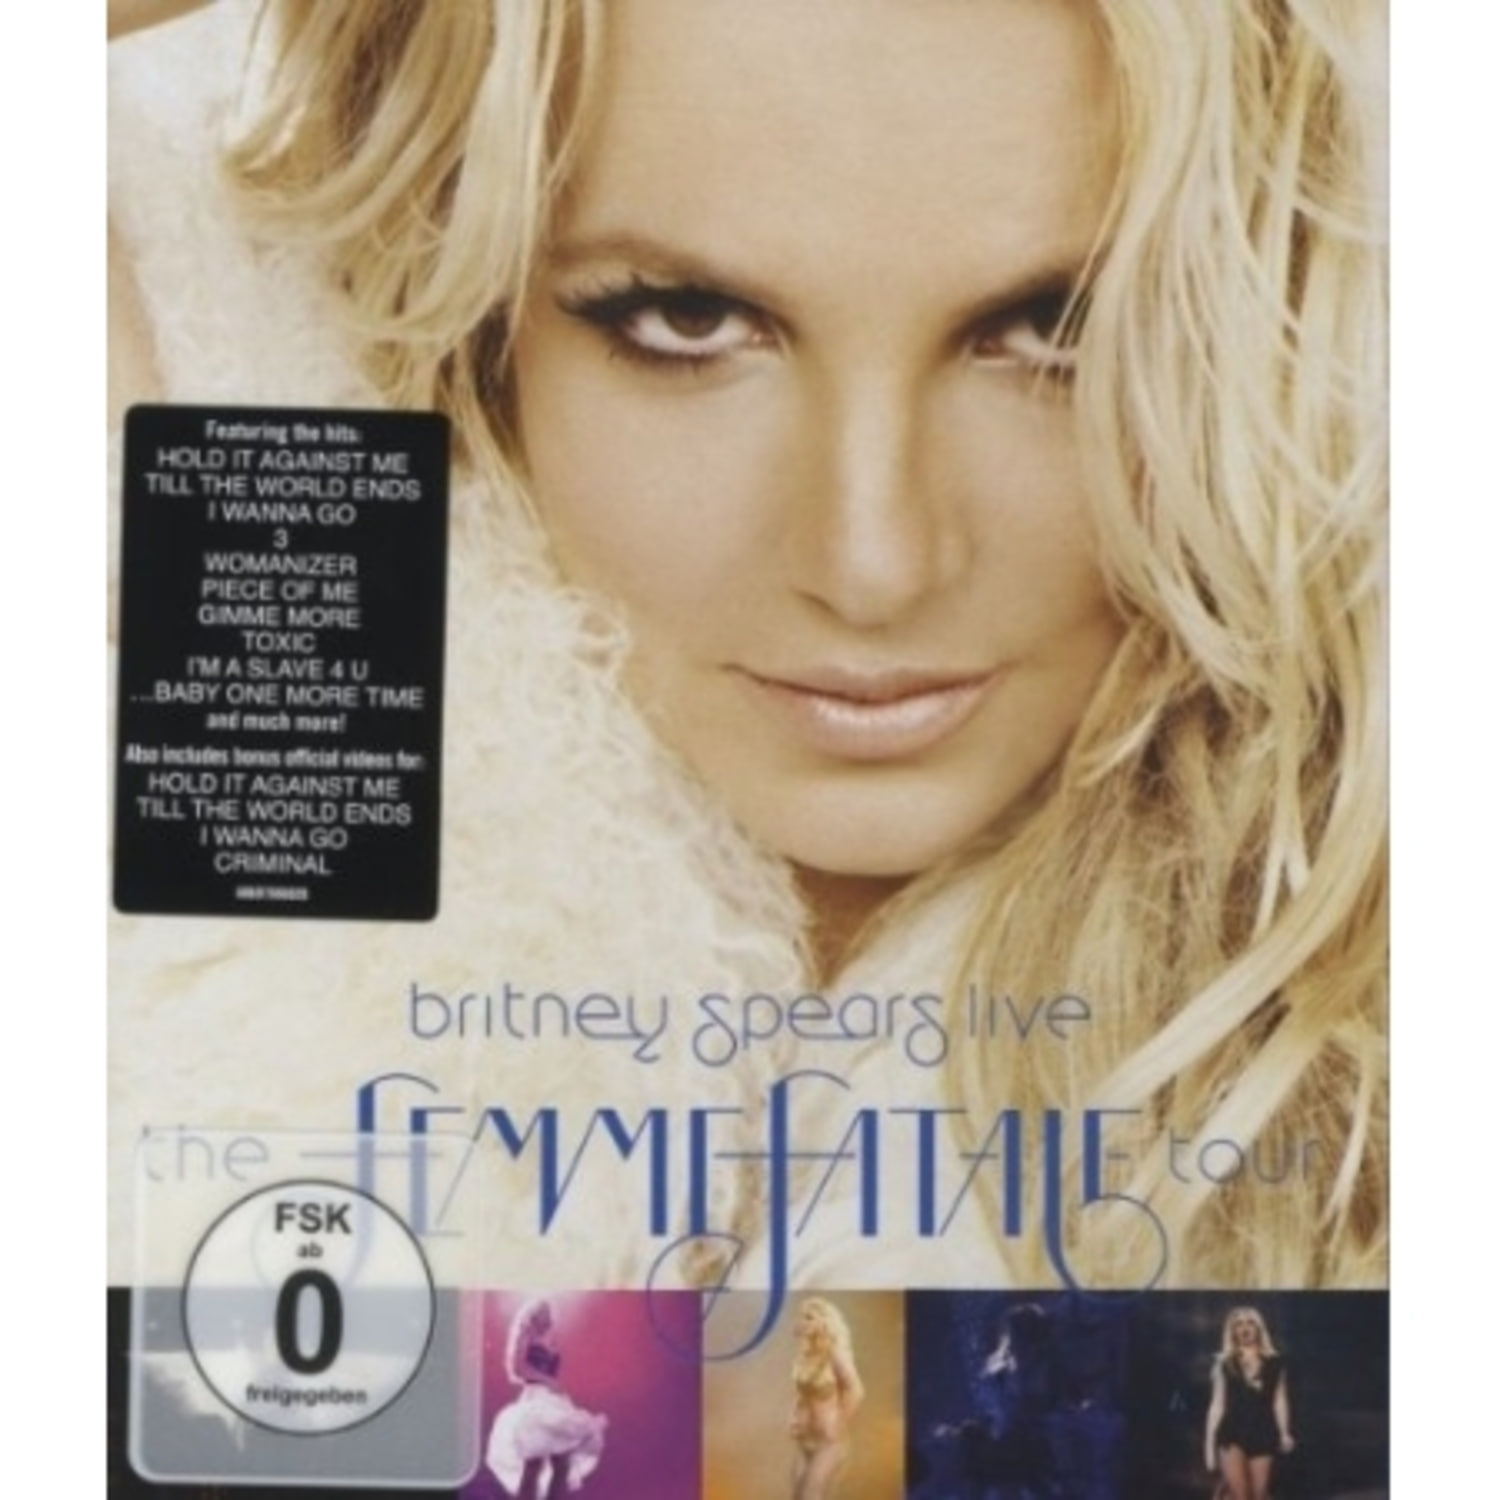 BRITNEY SPEARS - THE FEMME FATALE TOUR (1 DISC)